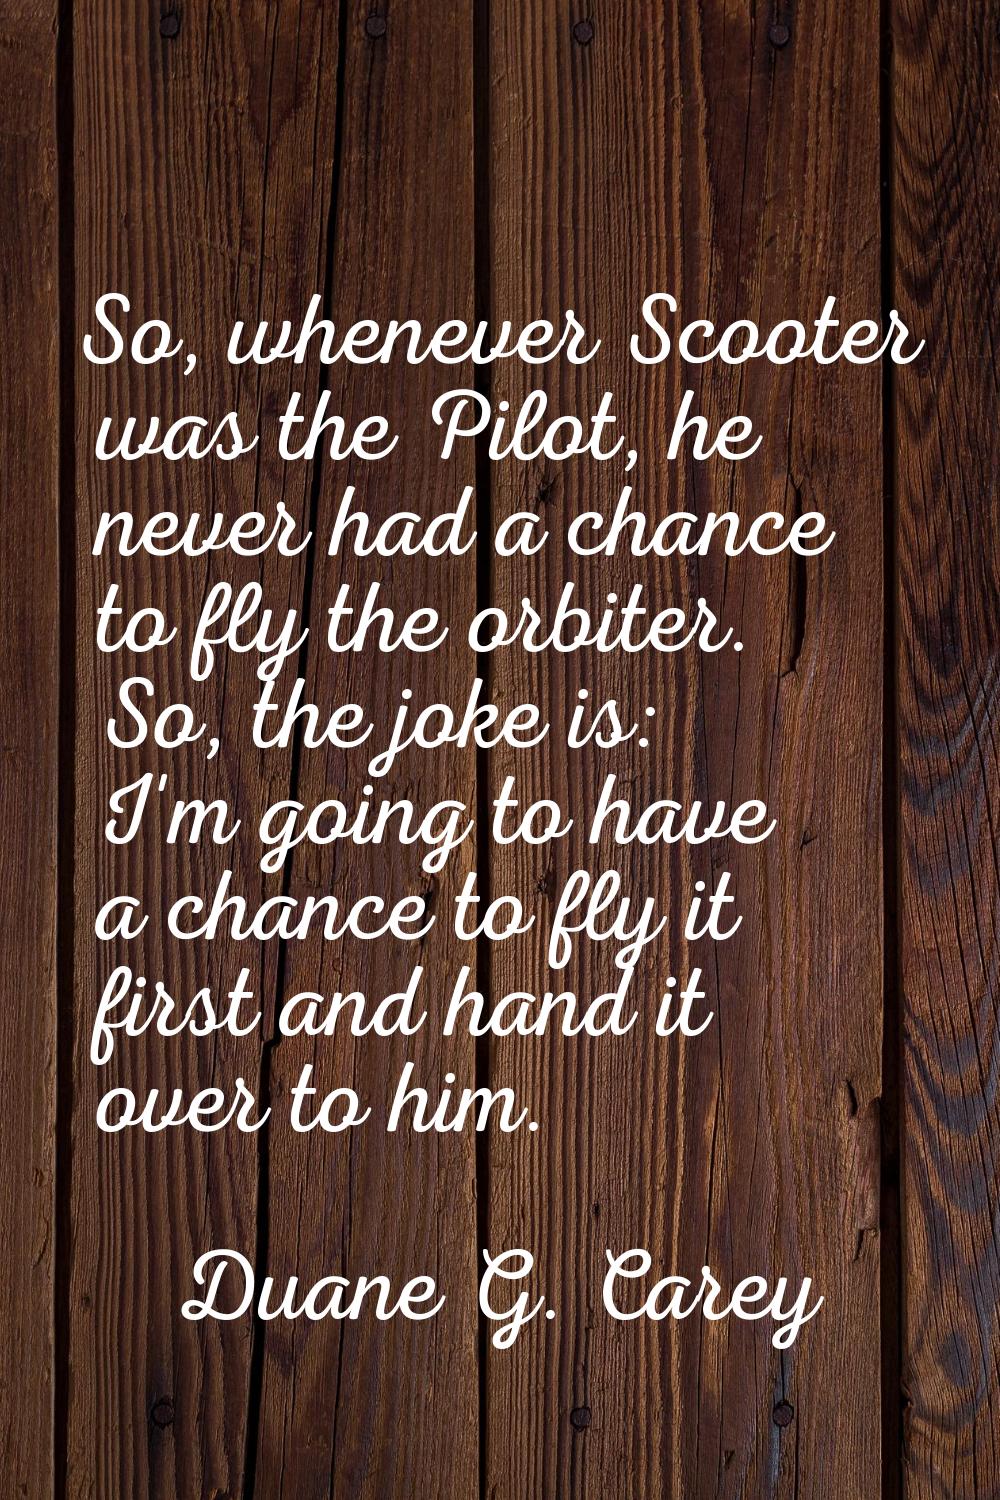 So, whenever Scooter was the Pilot, he never had a chance to fly the orbiter. So, the joke is: I'm 